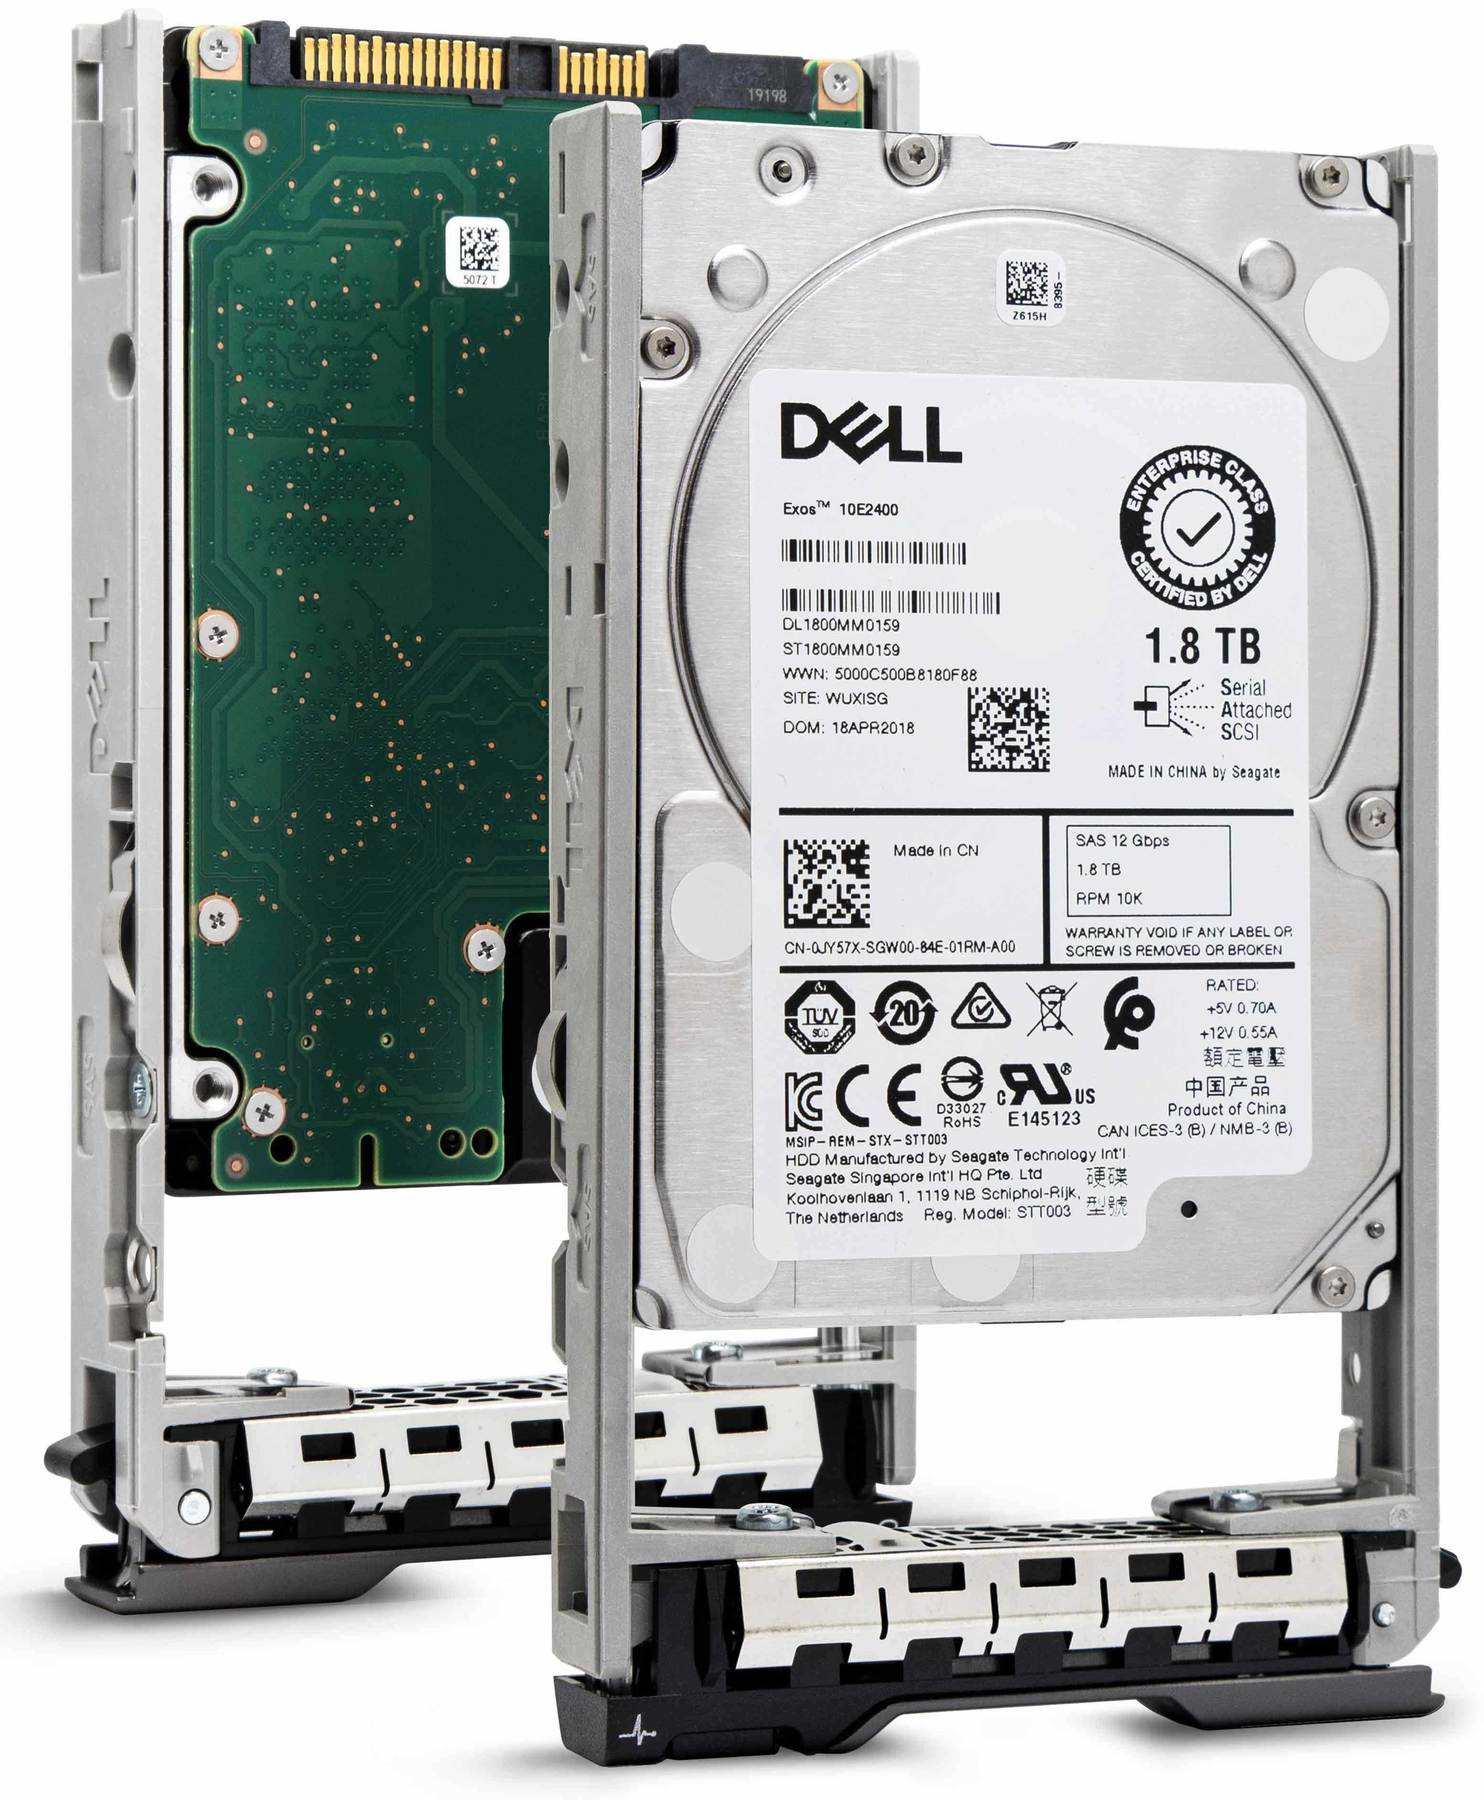 Dell G13 825MC 1.8TB 10K RPM SAS 6Gb/s 512e 2.5" Manufacturer Recertified HDD